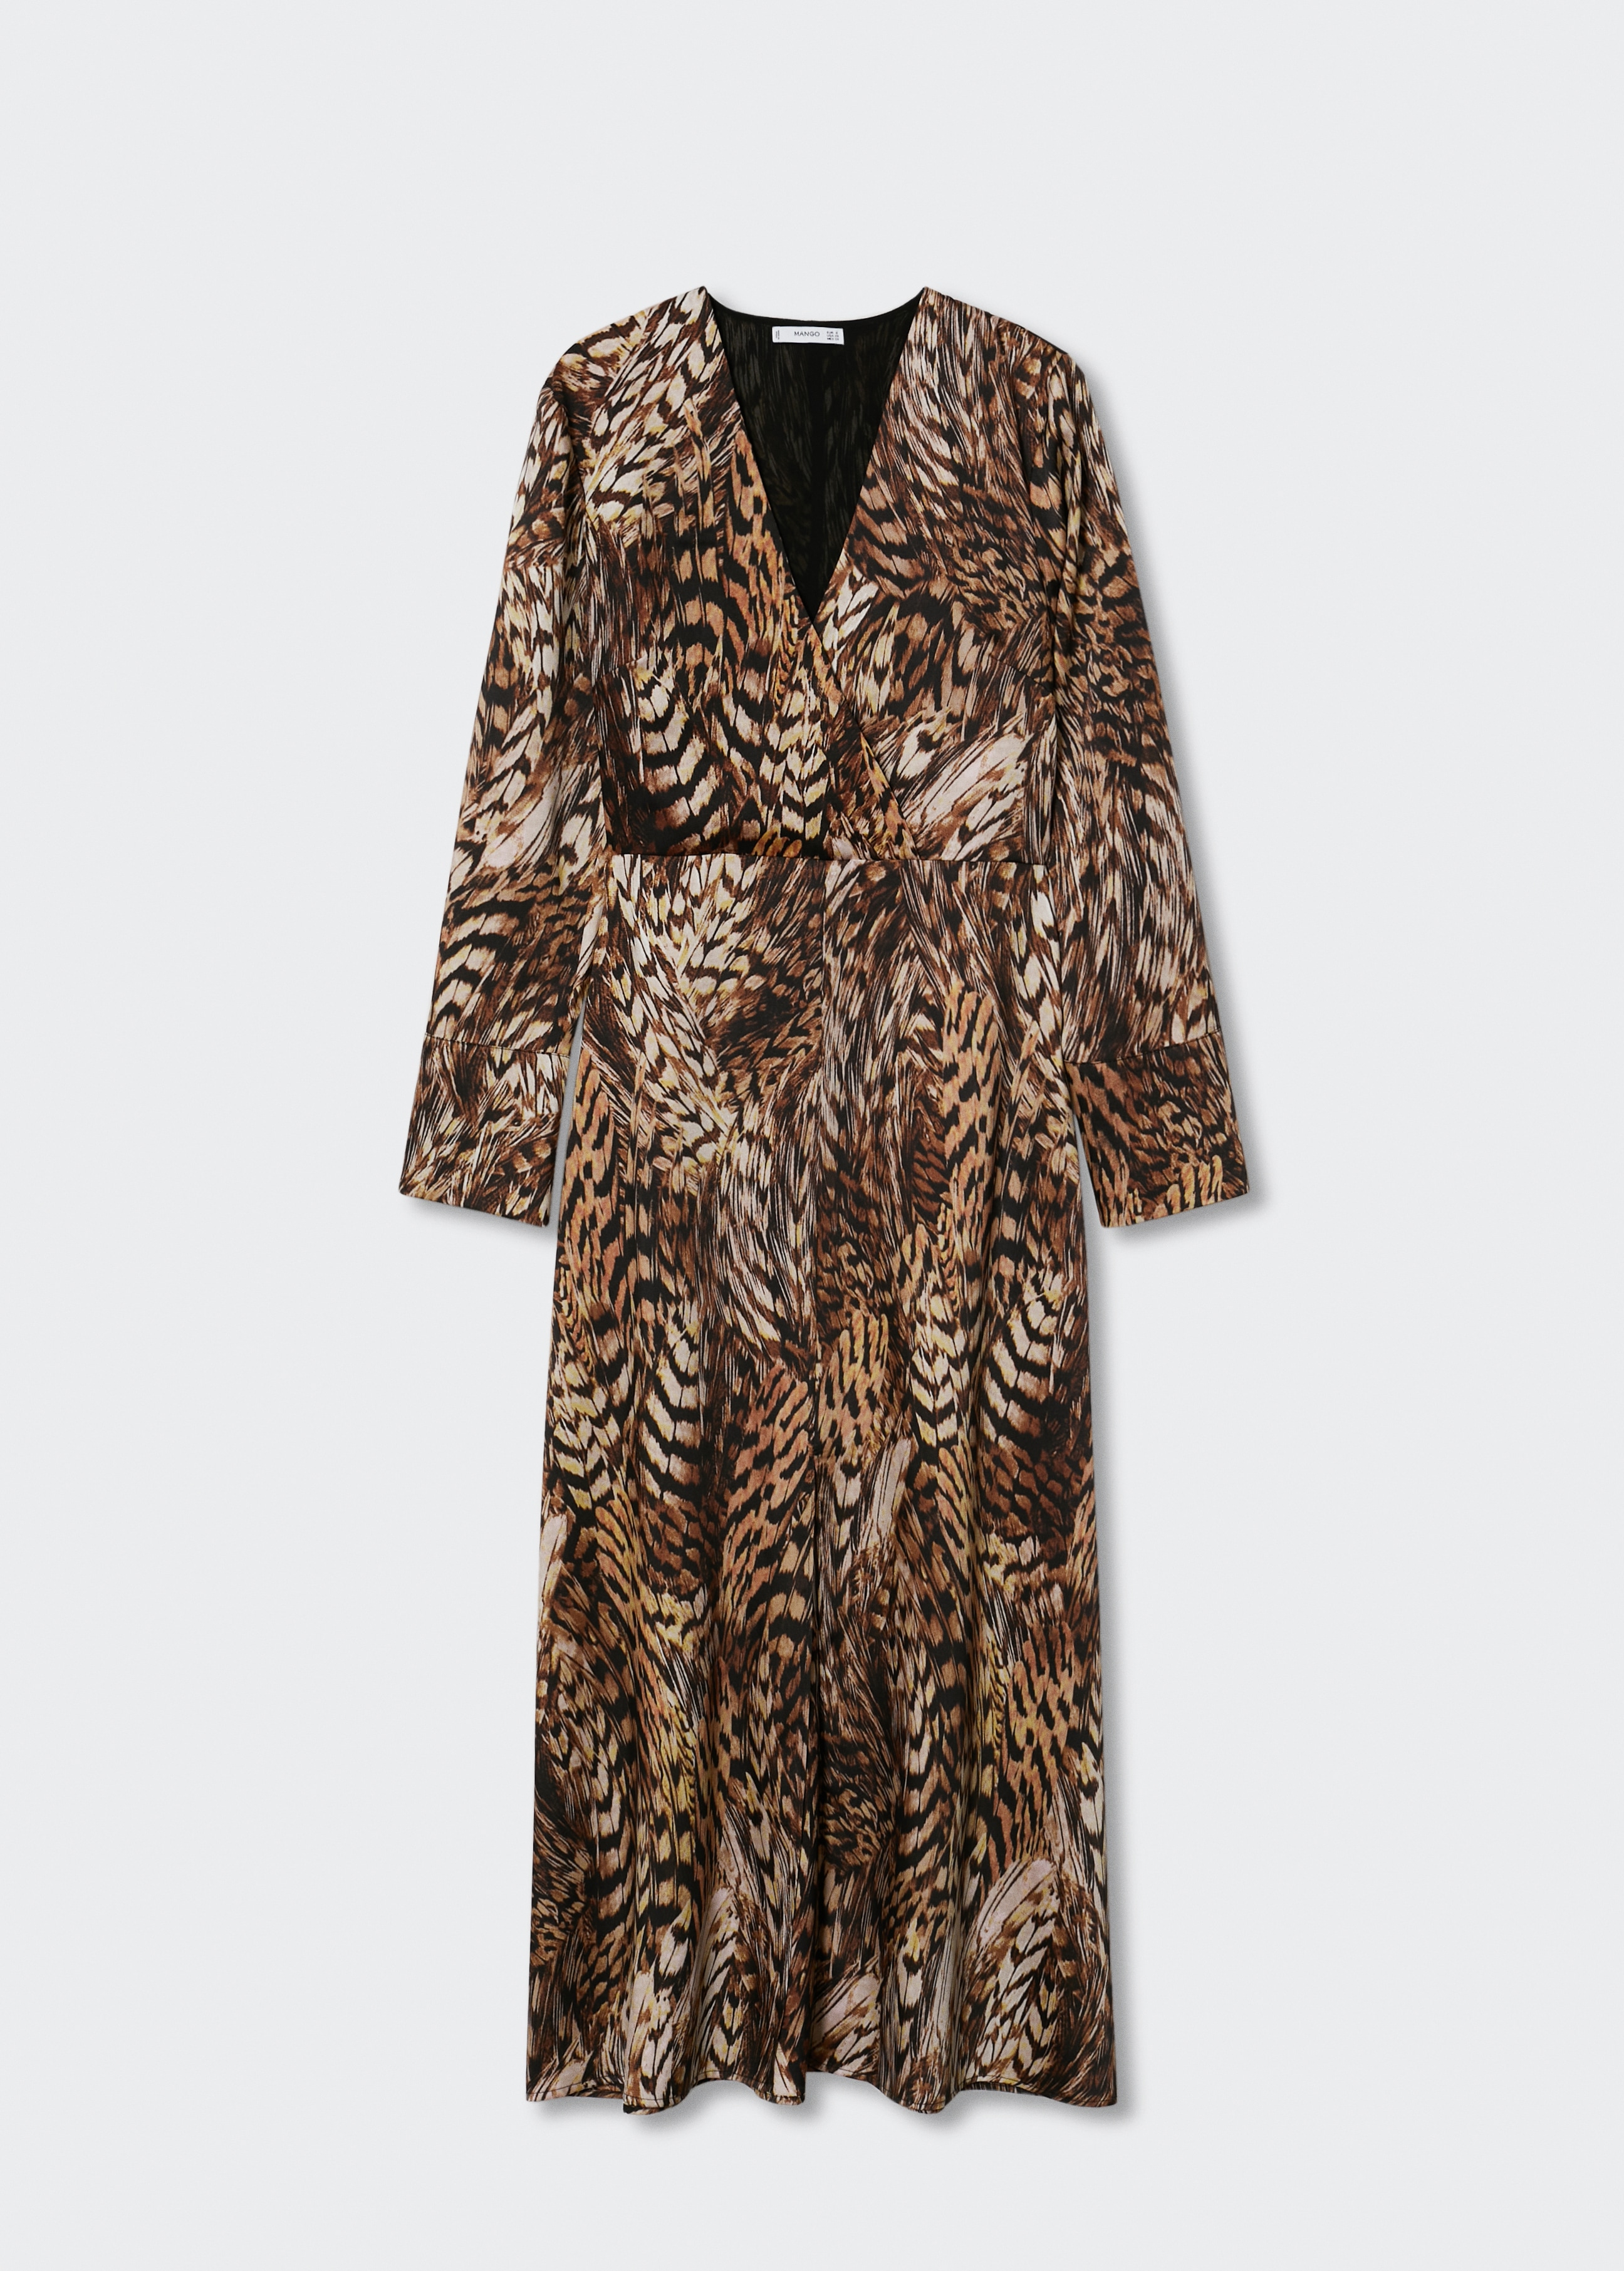 Flowy animal print dress - Article without model